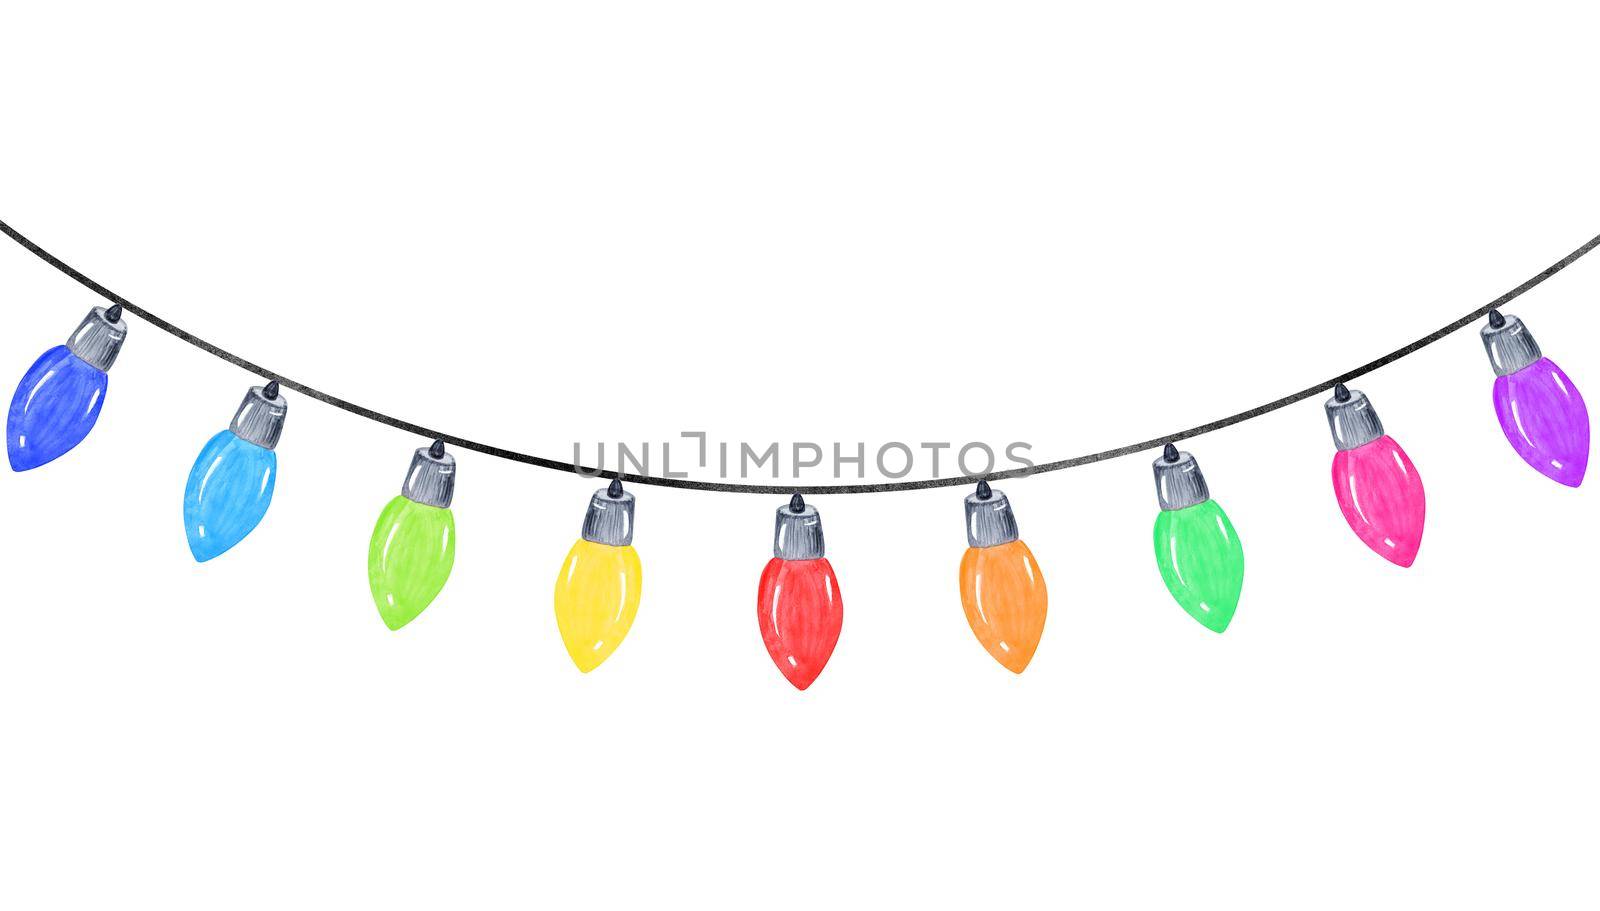 watercolor garland with color light bulbs isolated on white background. Christmas and birthday decoration. Holiday greeting cards border by dreamloud